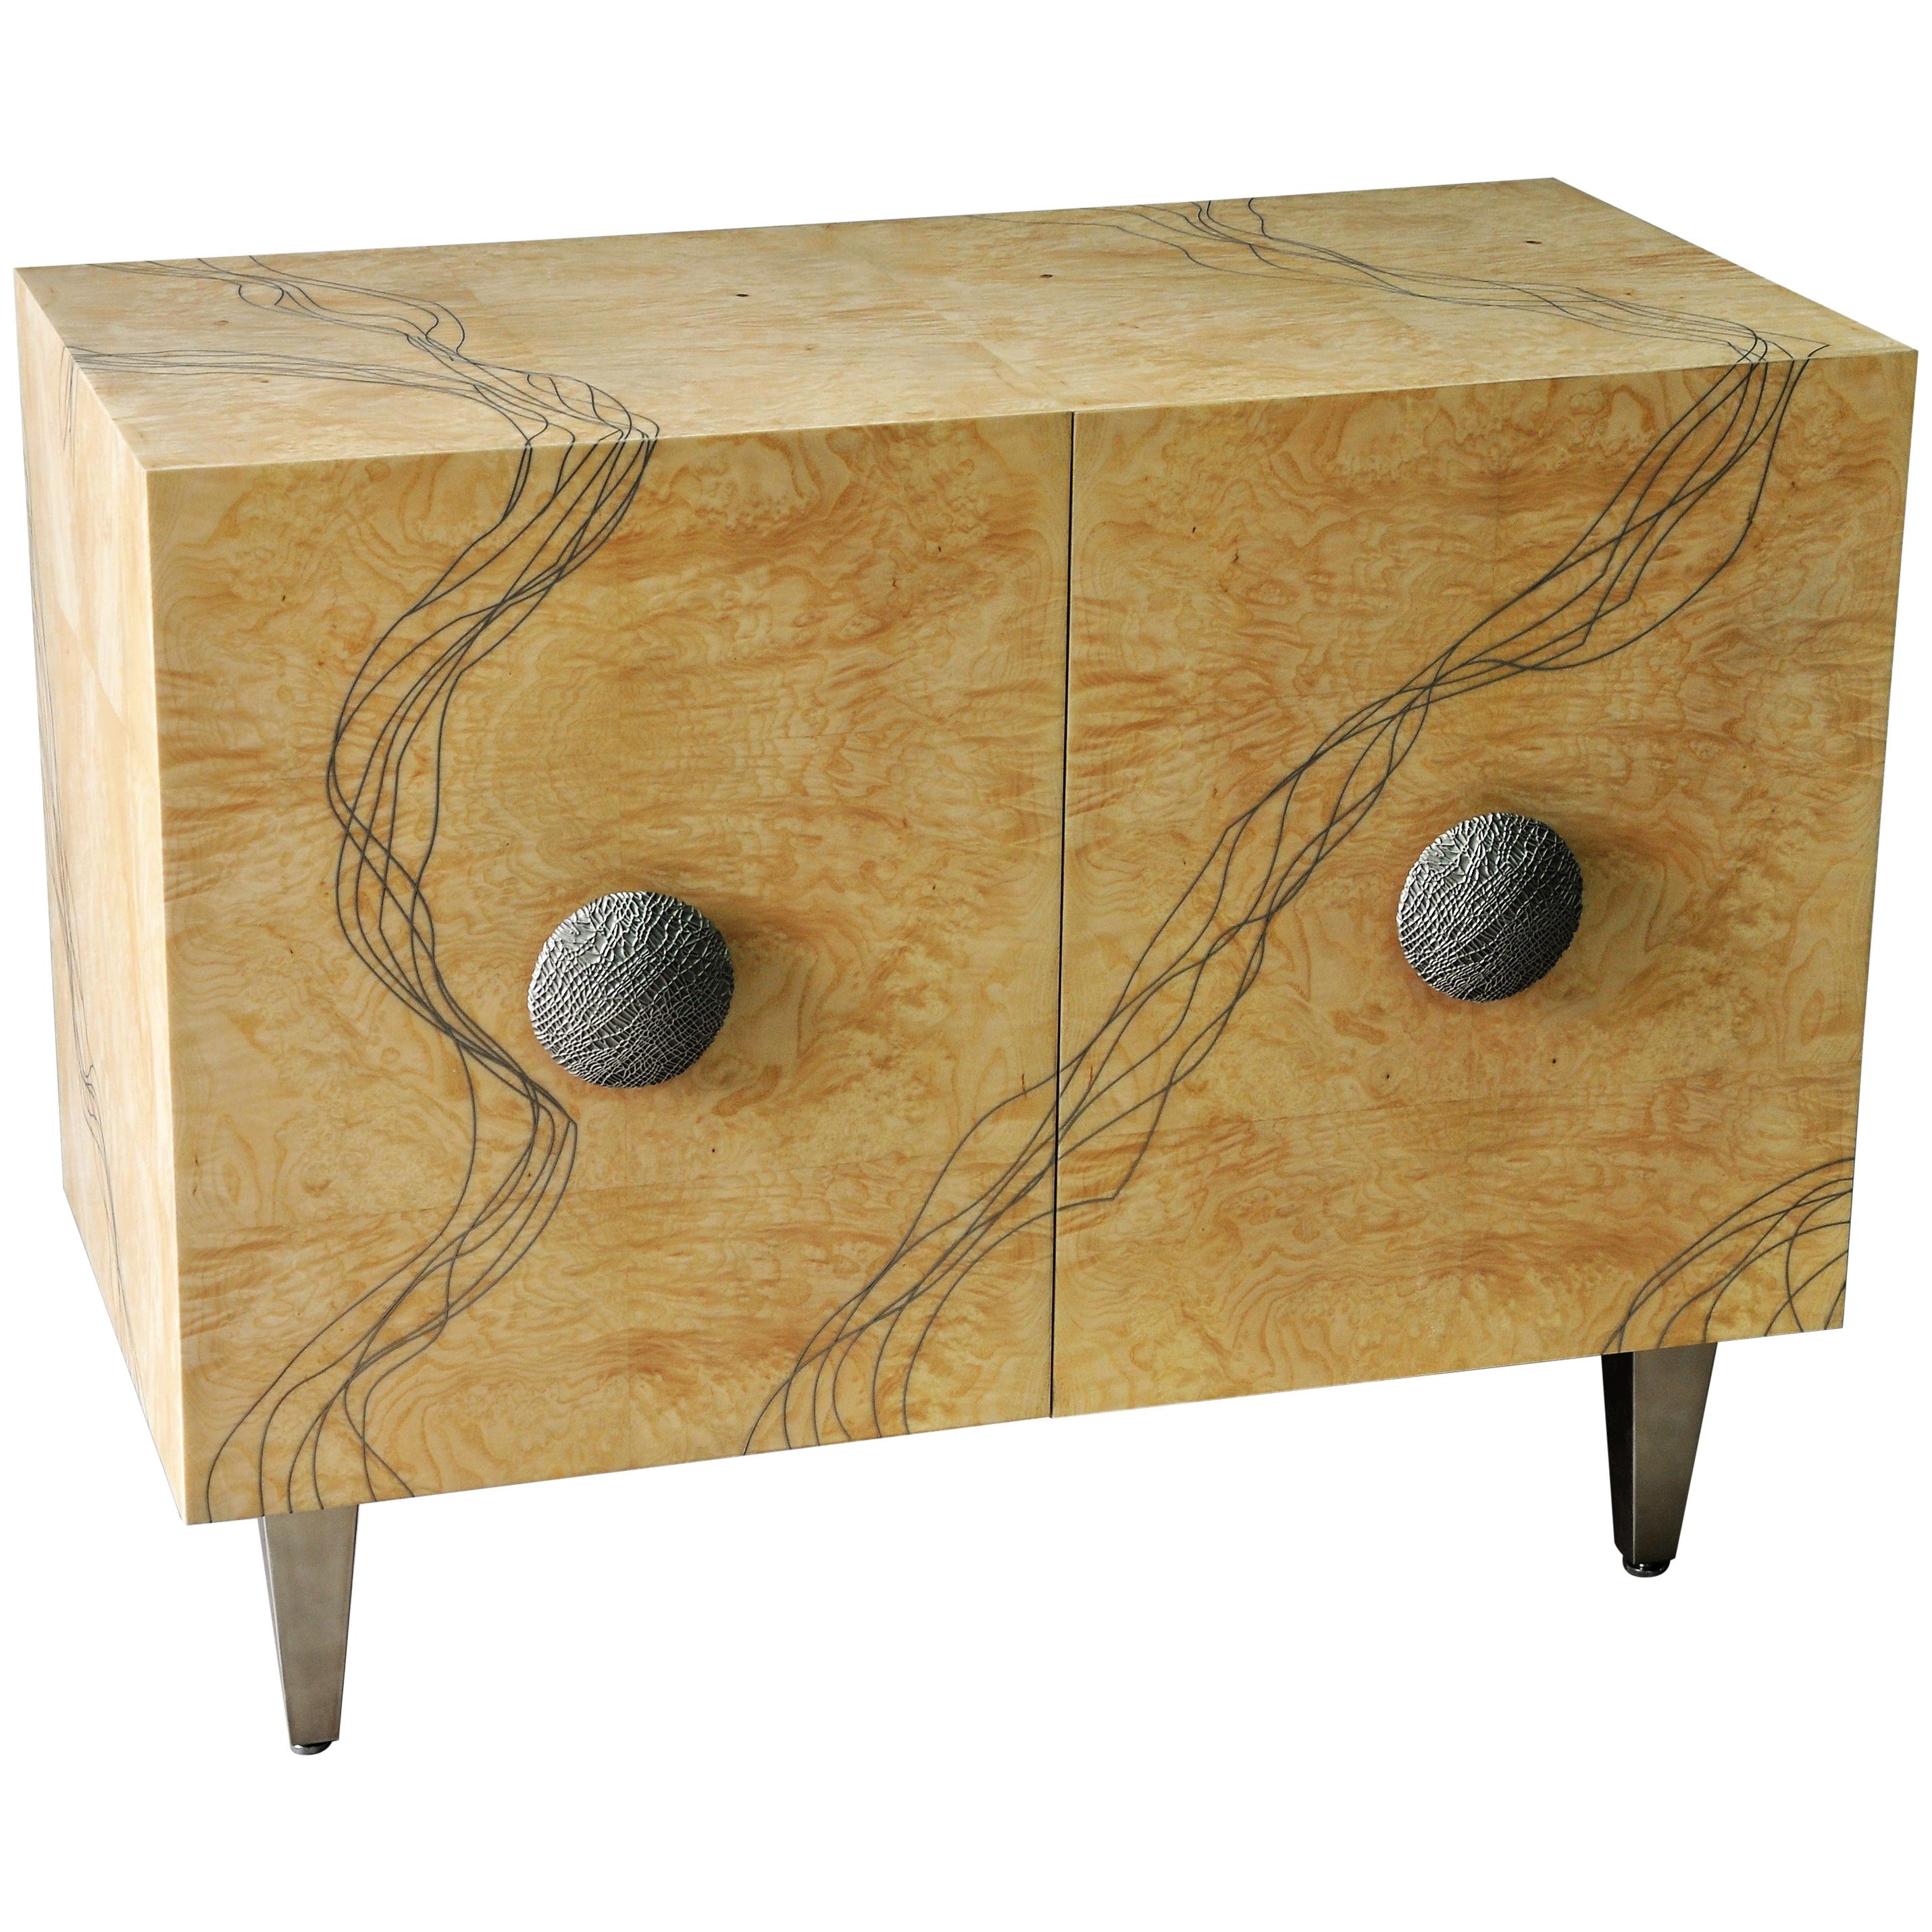 Ash and Titanium Sideboard "Entrelacs" - Contemporary, Limited Edition For Sale